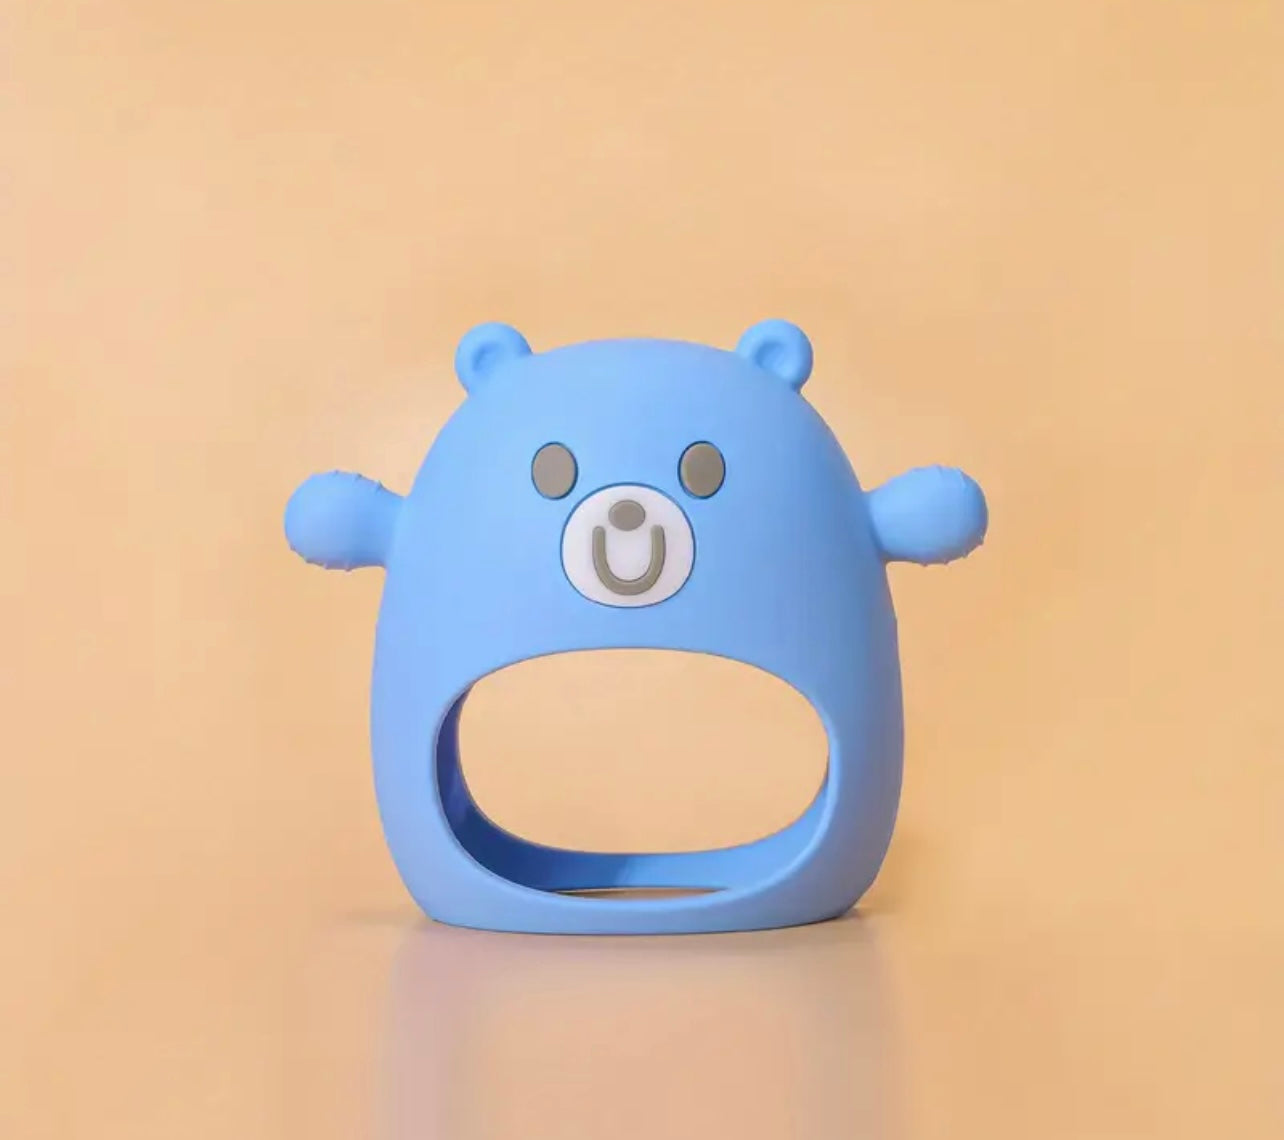 Blue Silicone Teething Toy